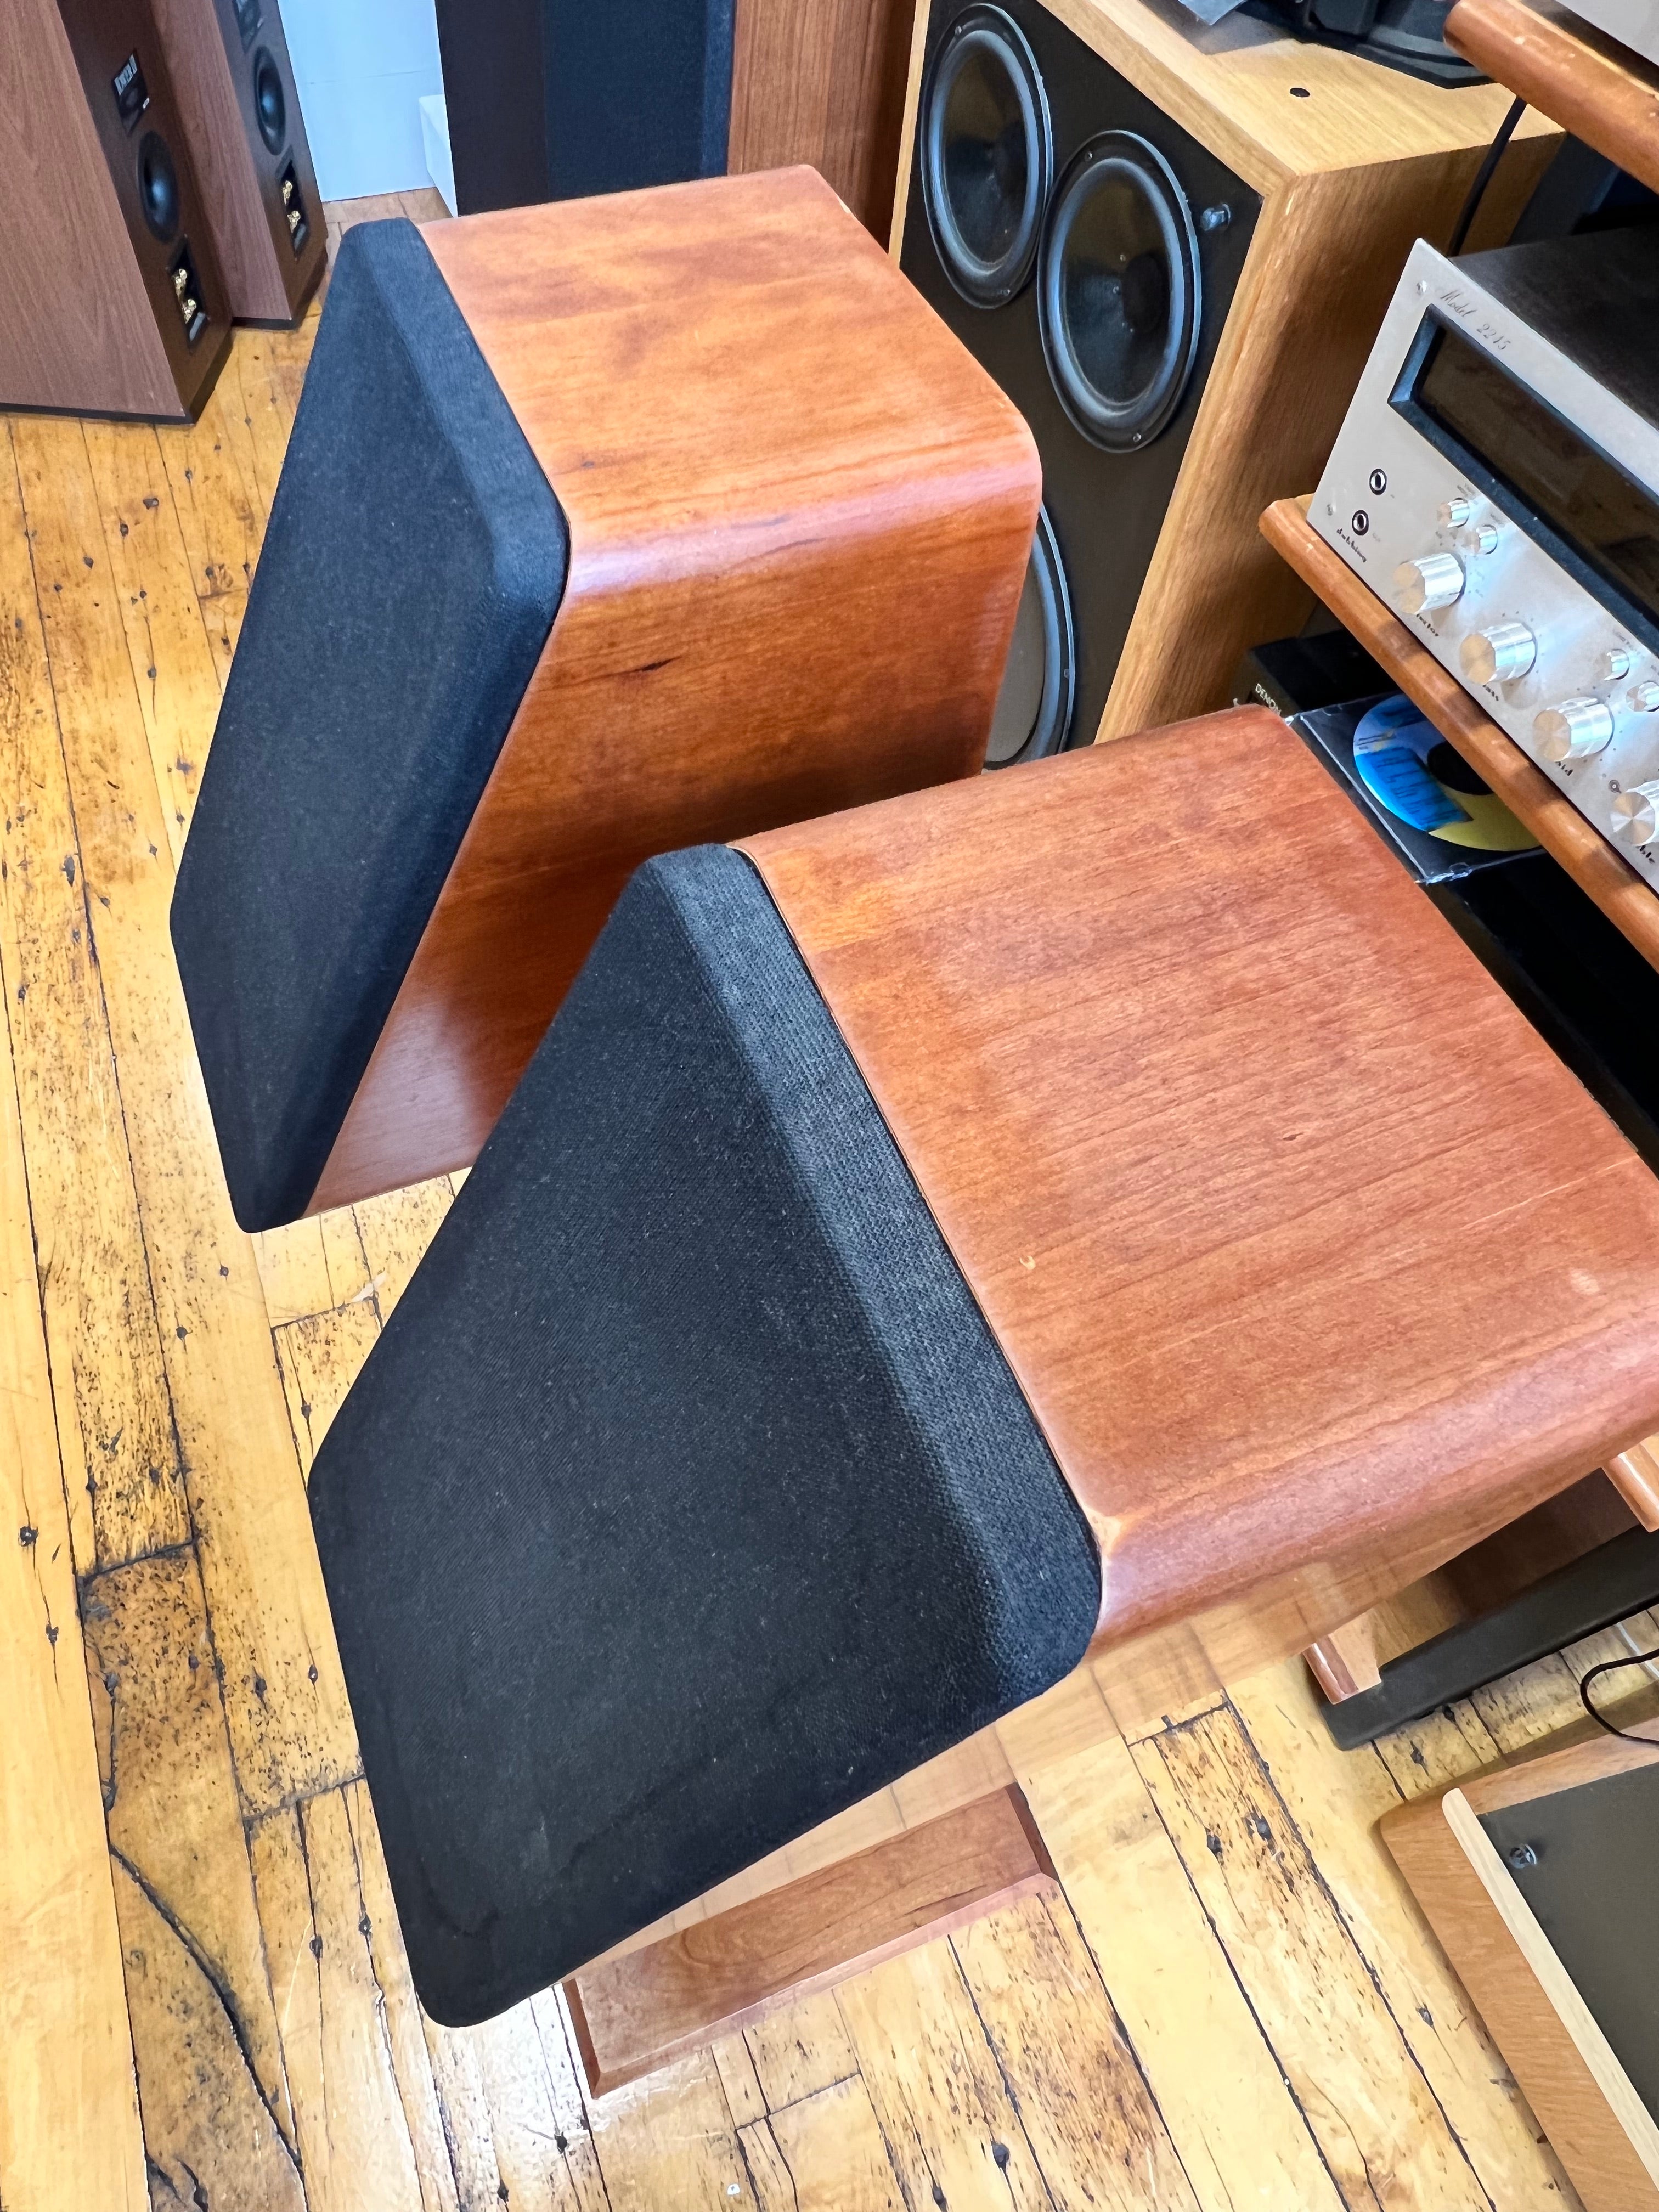 Audio Concepts, Inc. (ACI) LV Monitors with Stands - SOLD – Holt